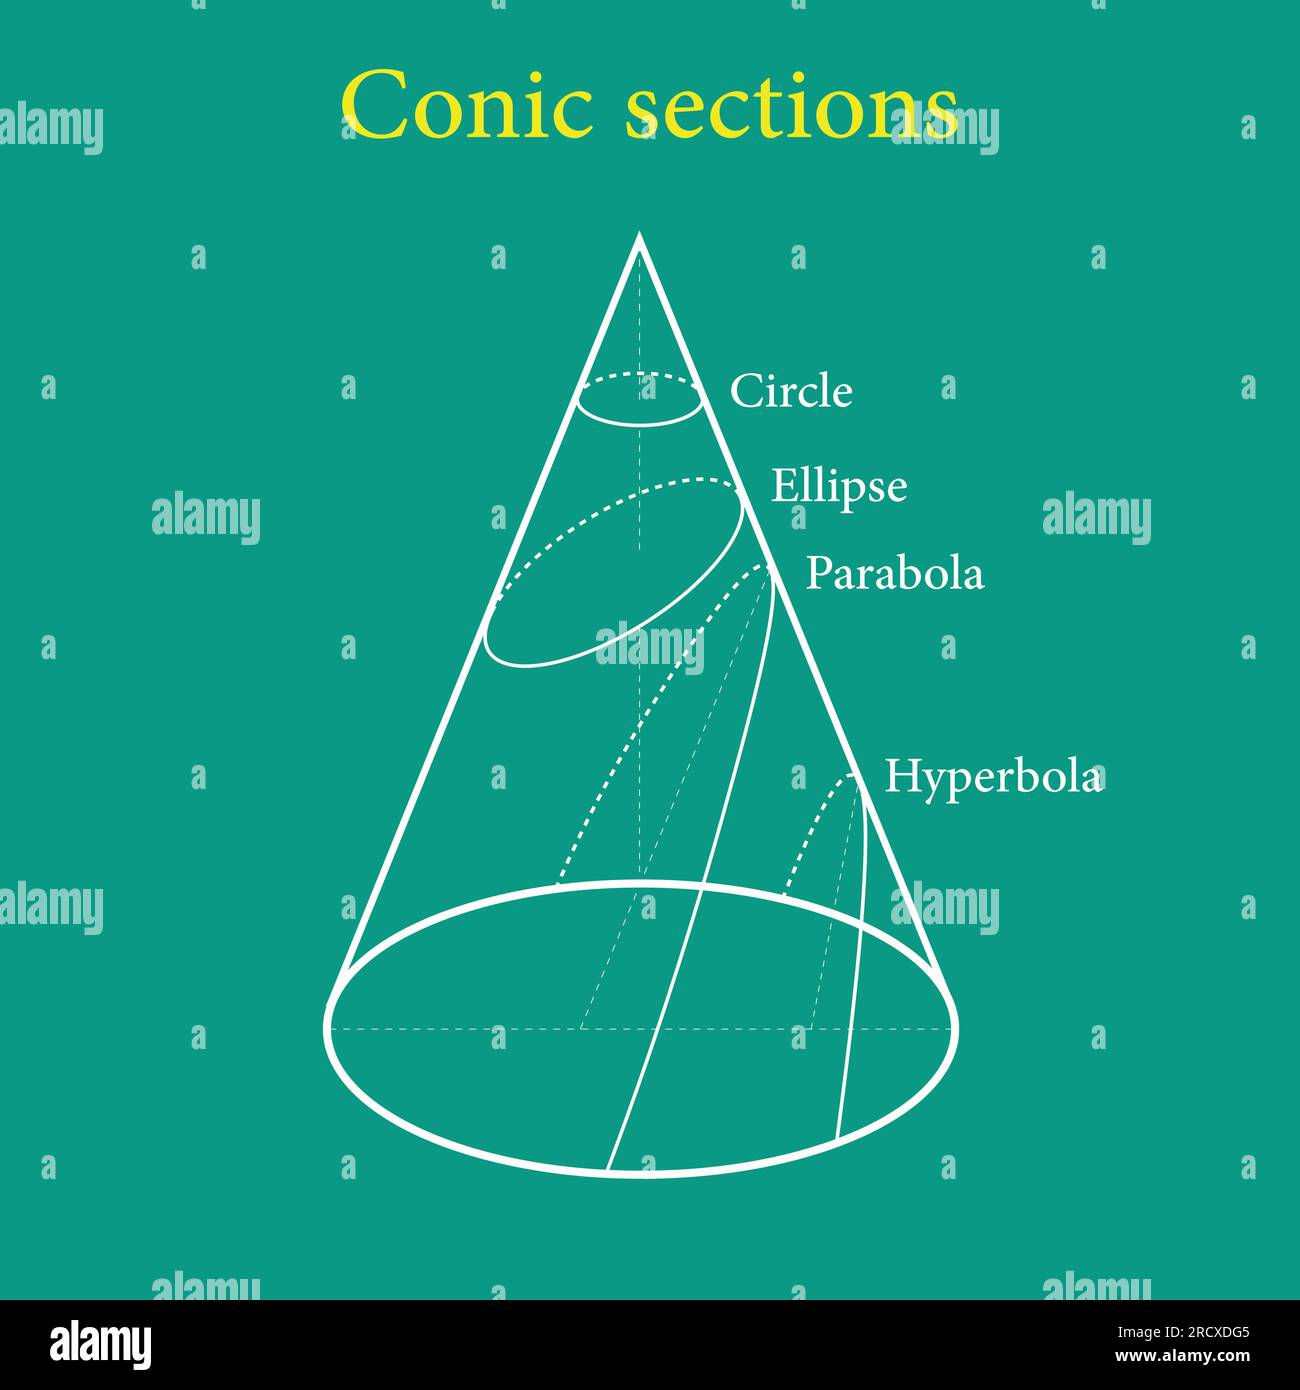 Types of conic sections. Circle, Ellipse, Parabola and Hyperbola. Vector illustration isolated on chalkboard. Stock Vector